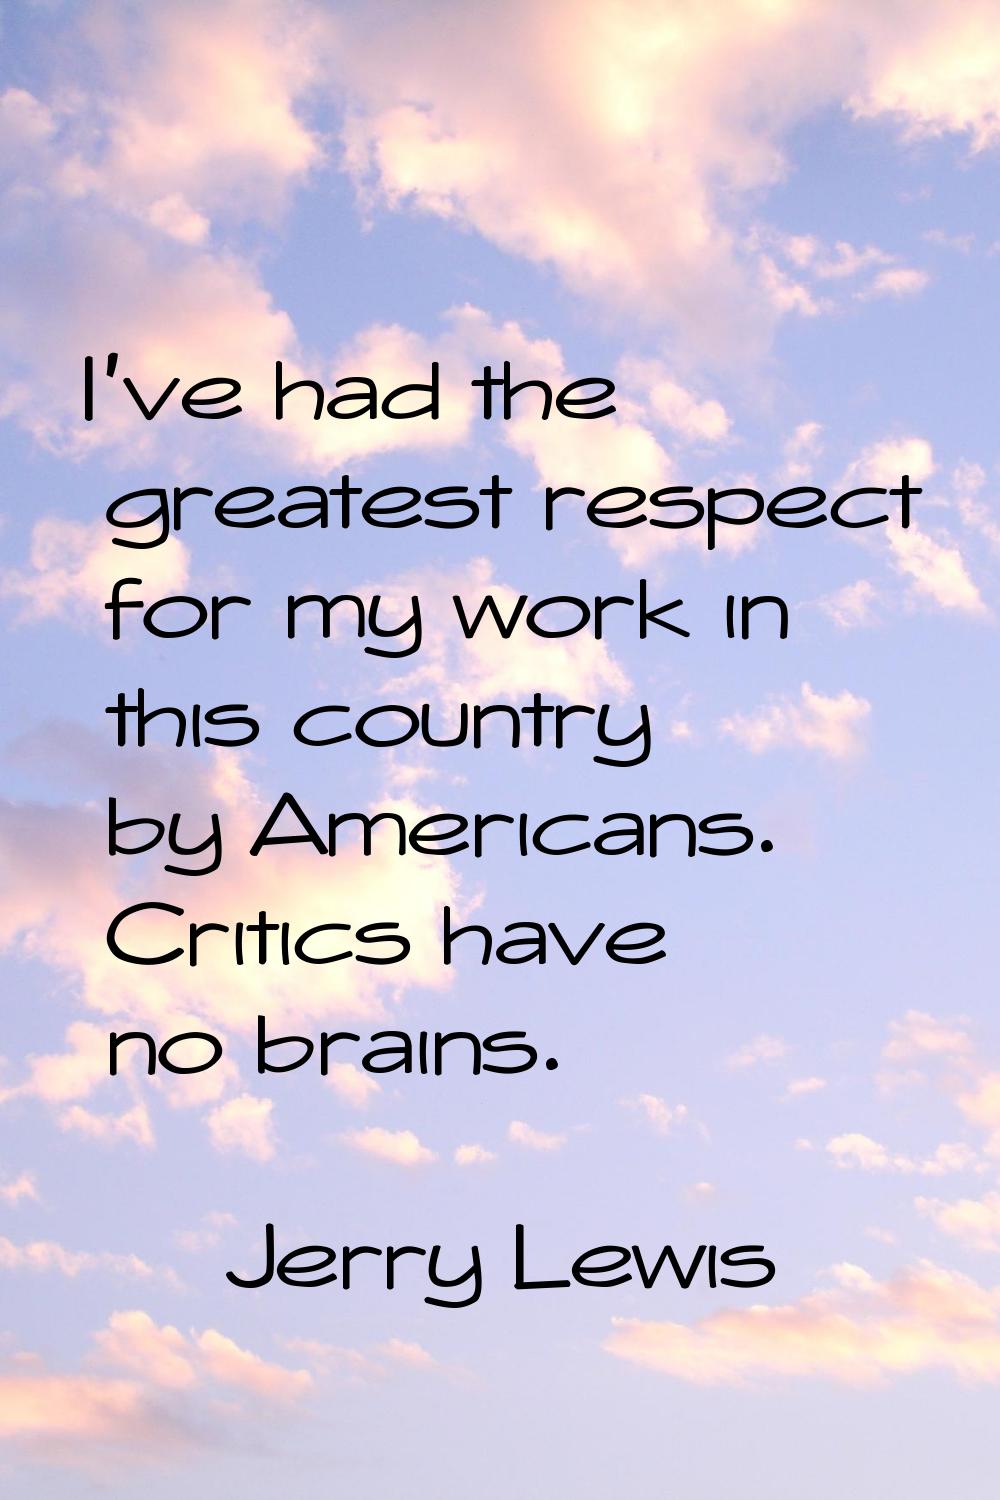 I've had the greatest respect for my work in this country by Americans. Critics have no brains.